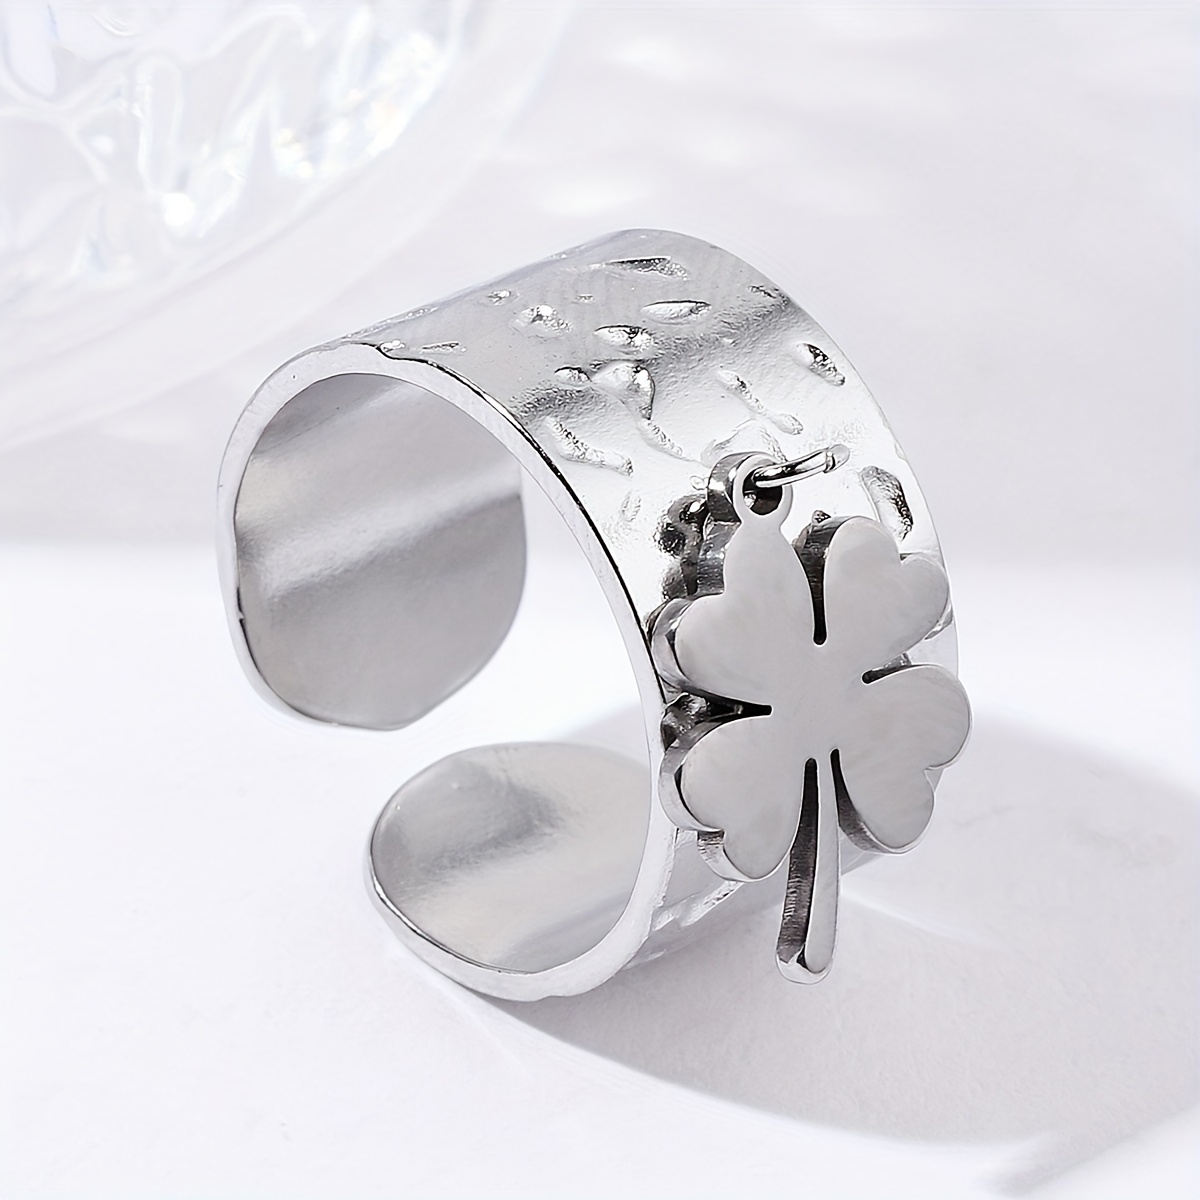 

Stainless Steel Four-leaf Clover Open Ring, Men's Textured Wide Ring, For Daily Wear, For Banquet Party Holiday Birthday Anniversary Gift